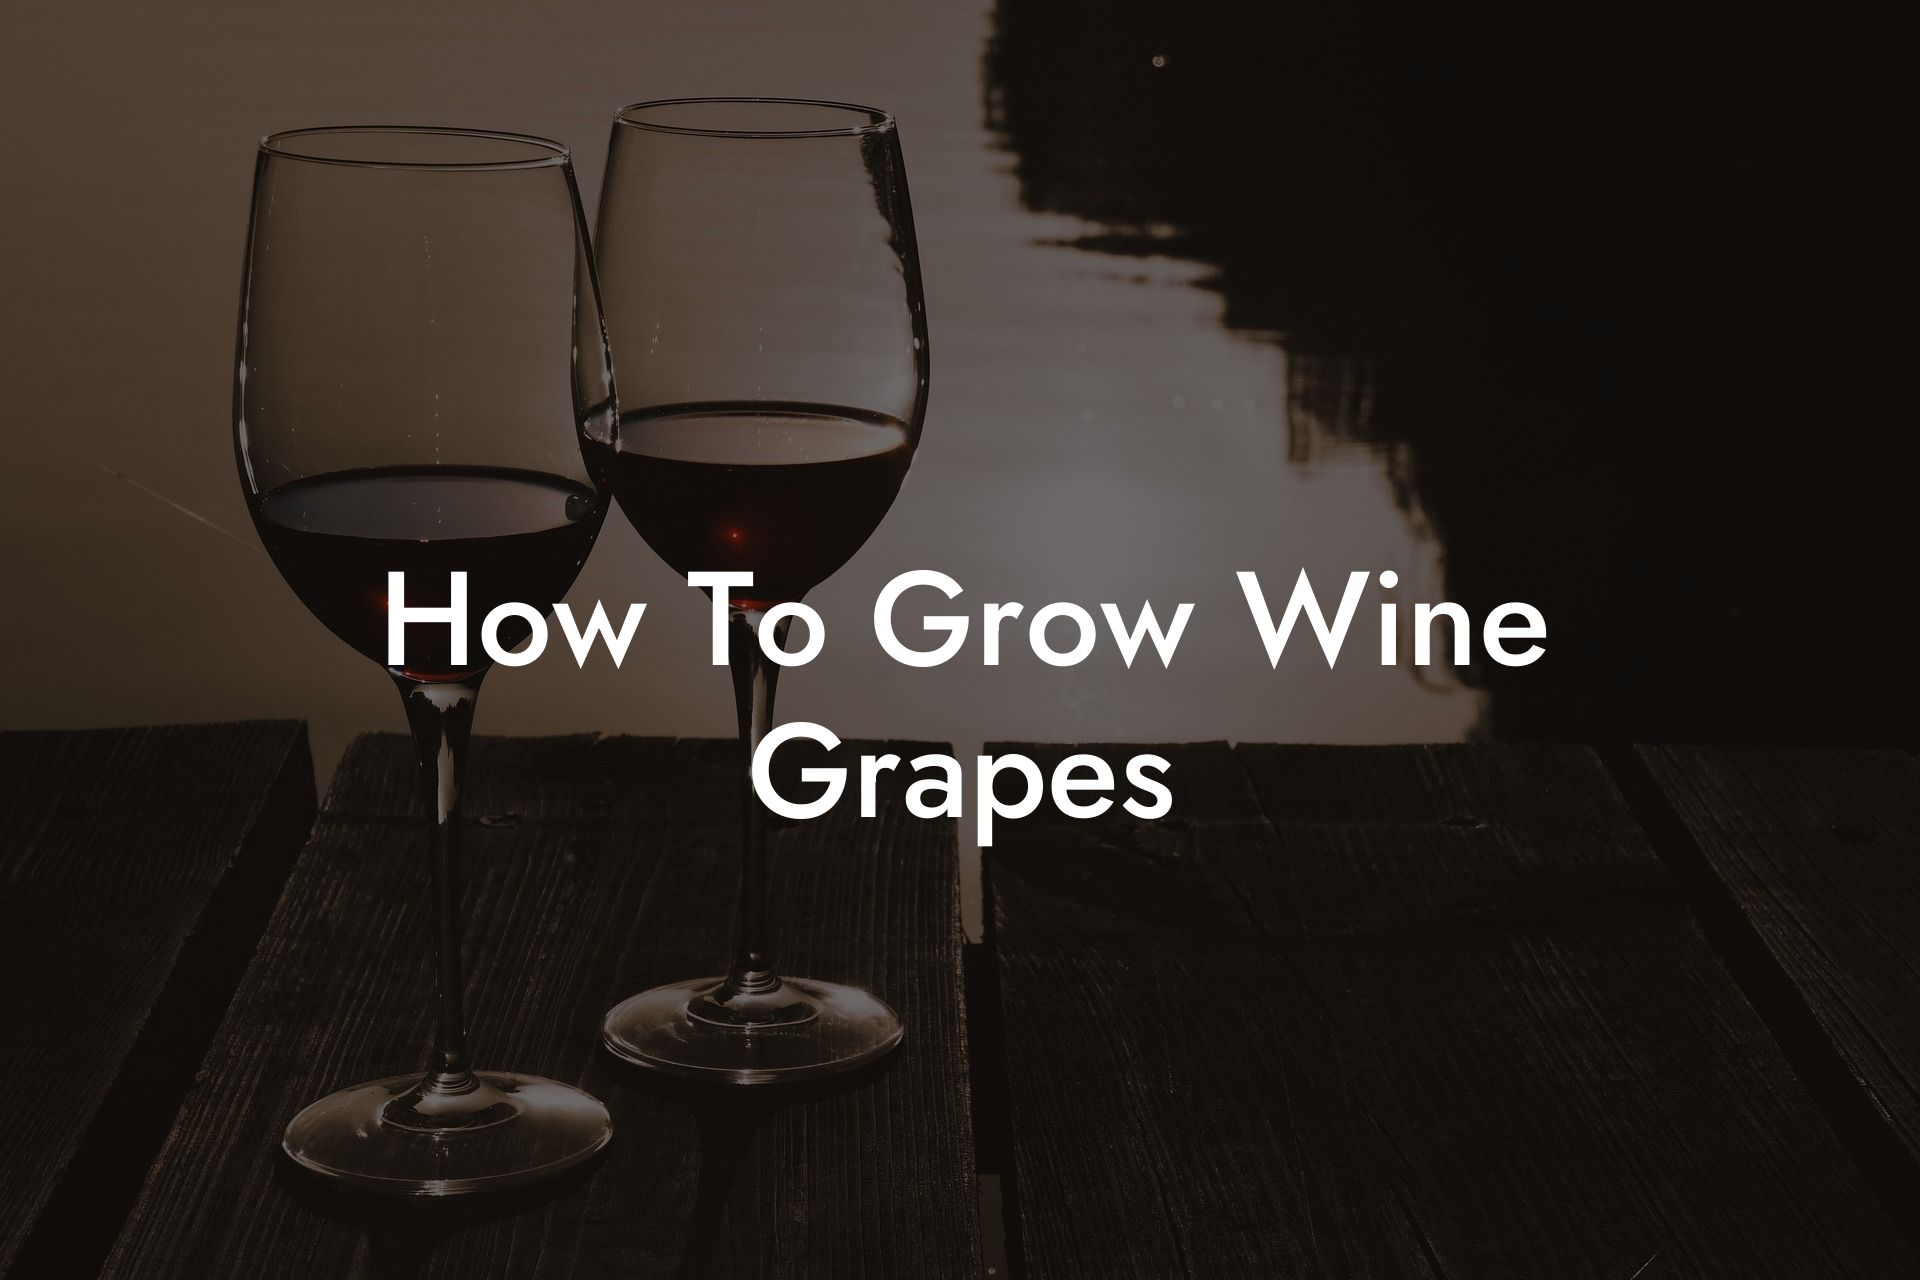 How To Grow Wine Grapes